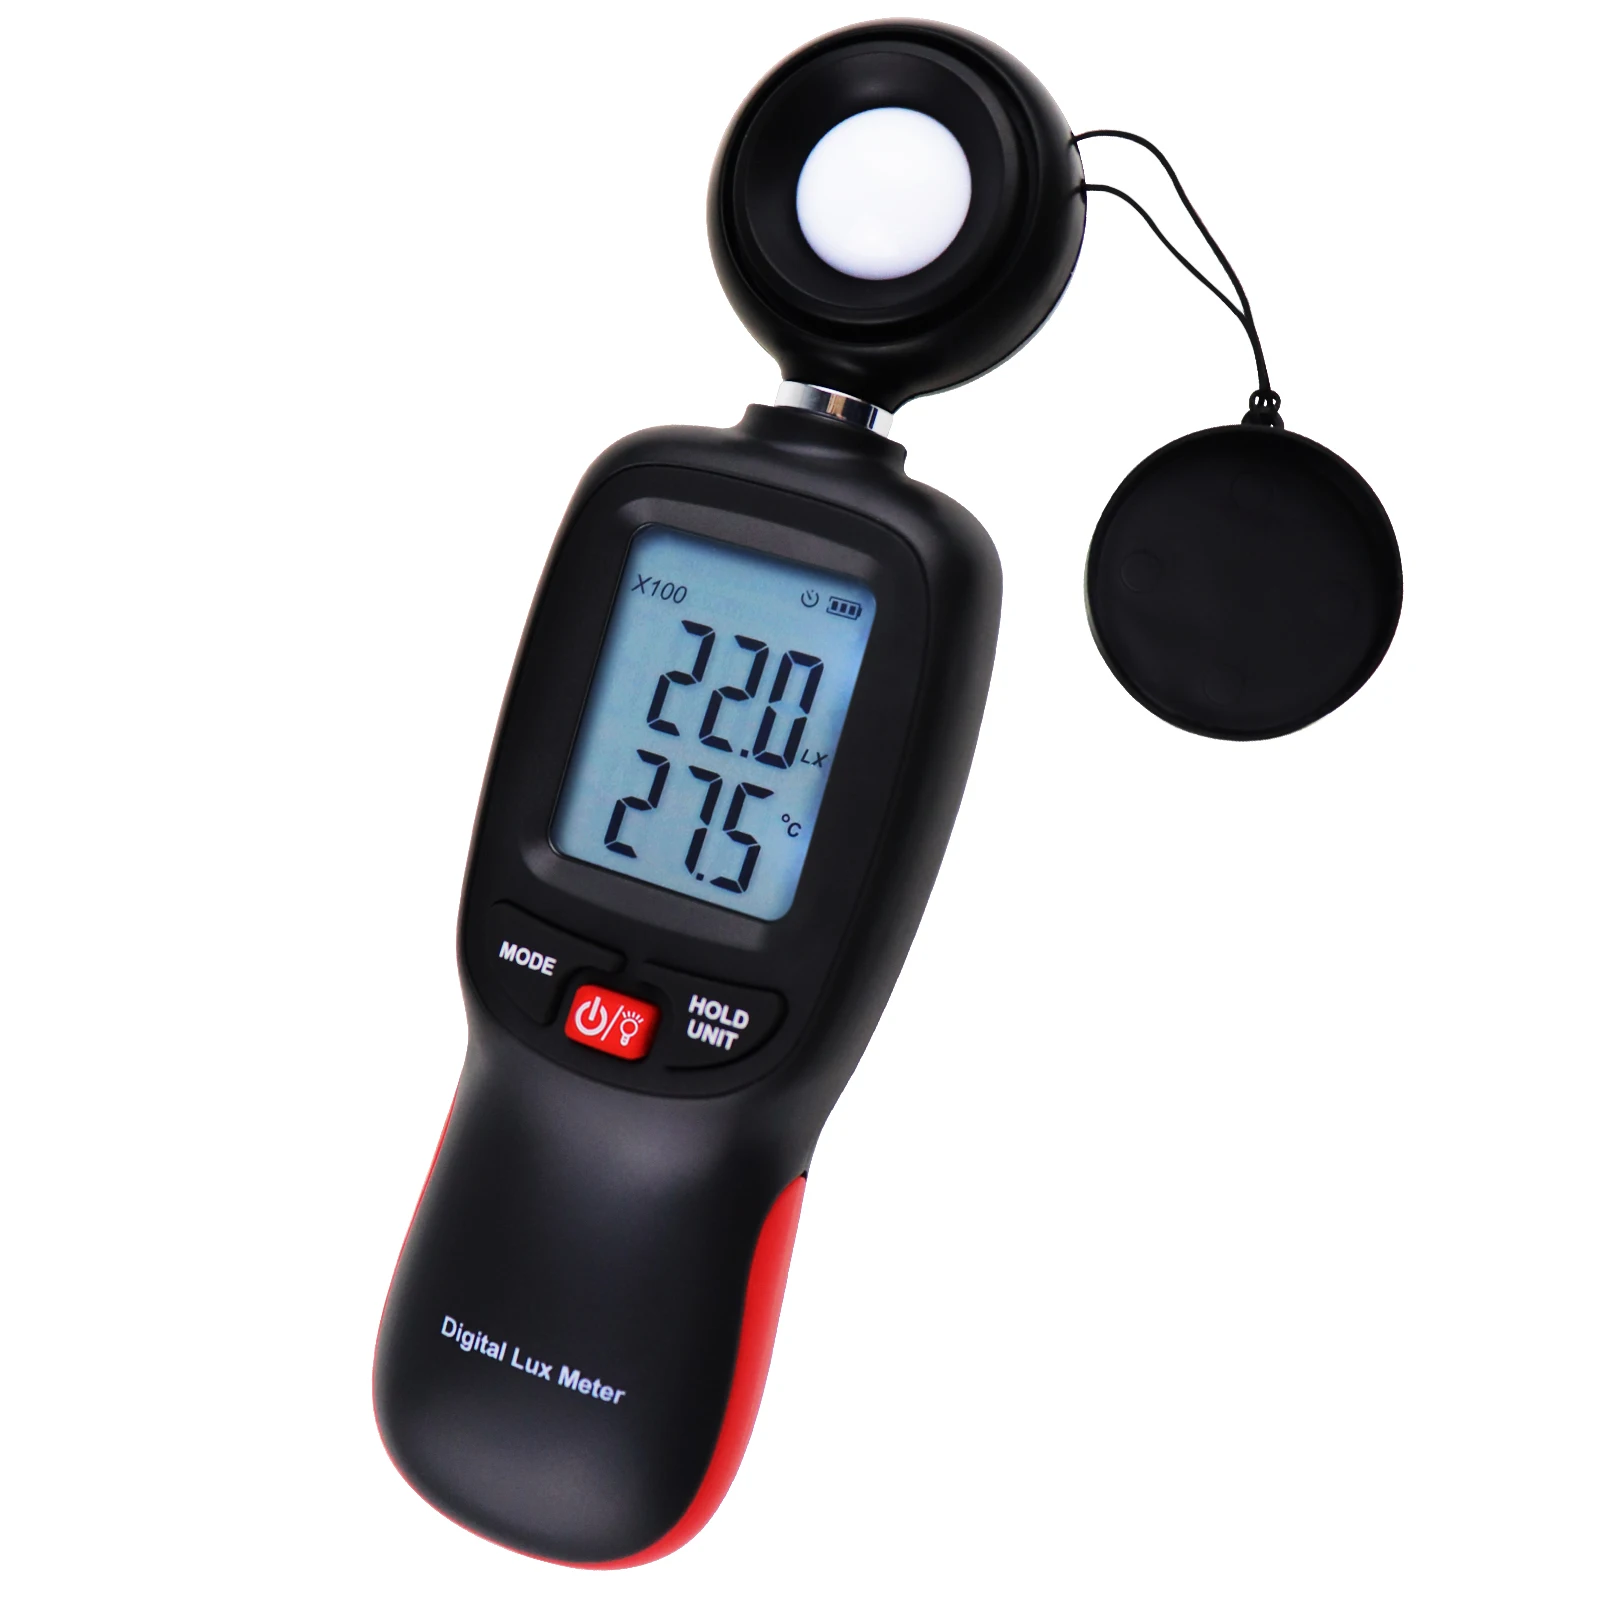 

Digital Anemometer Luminometer Wind Measurement 200,000 Lux Luxmeter Foot Candle/Lux Temperature Tester Handheld with Backlight